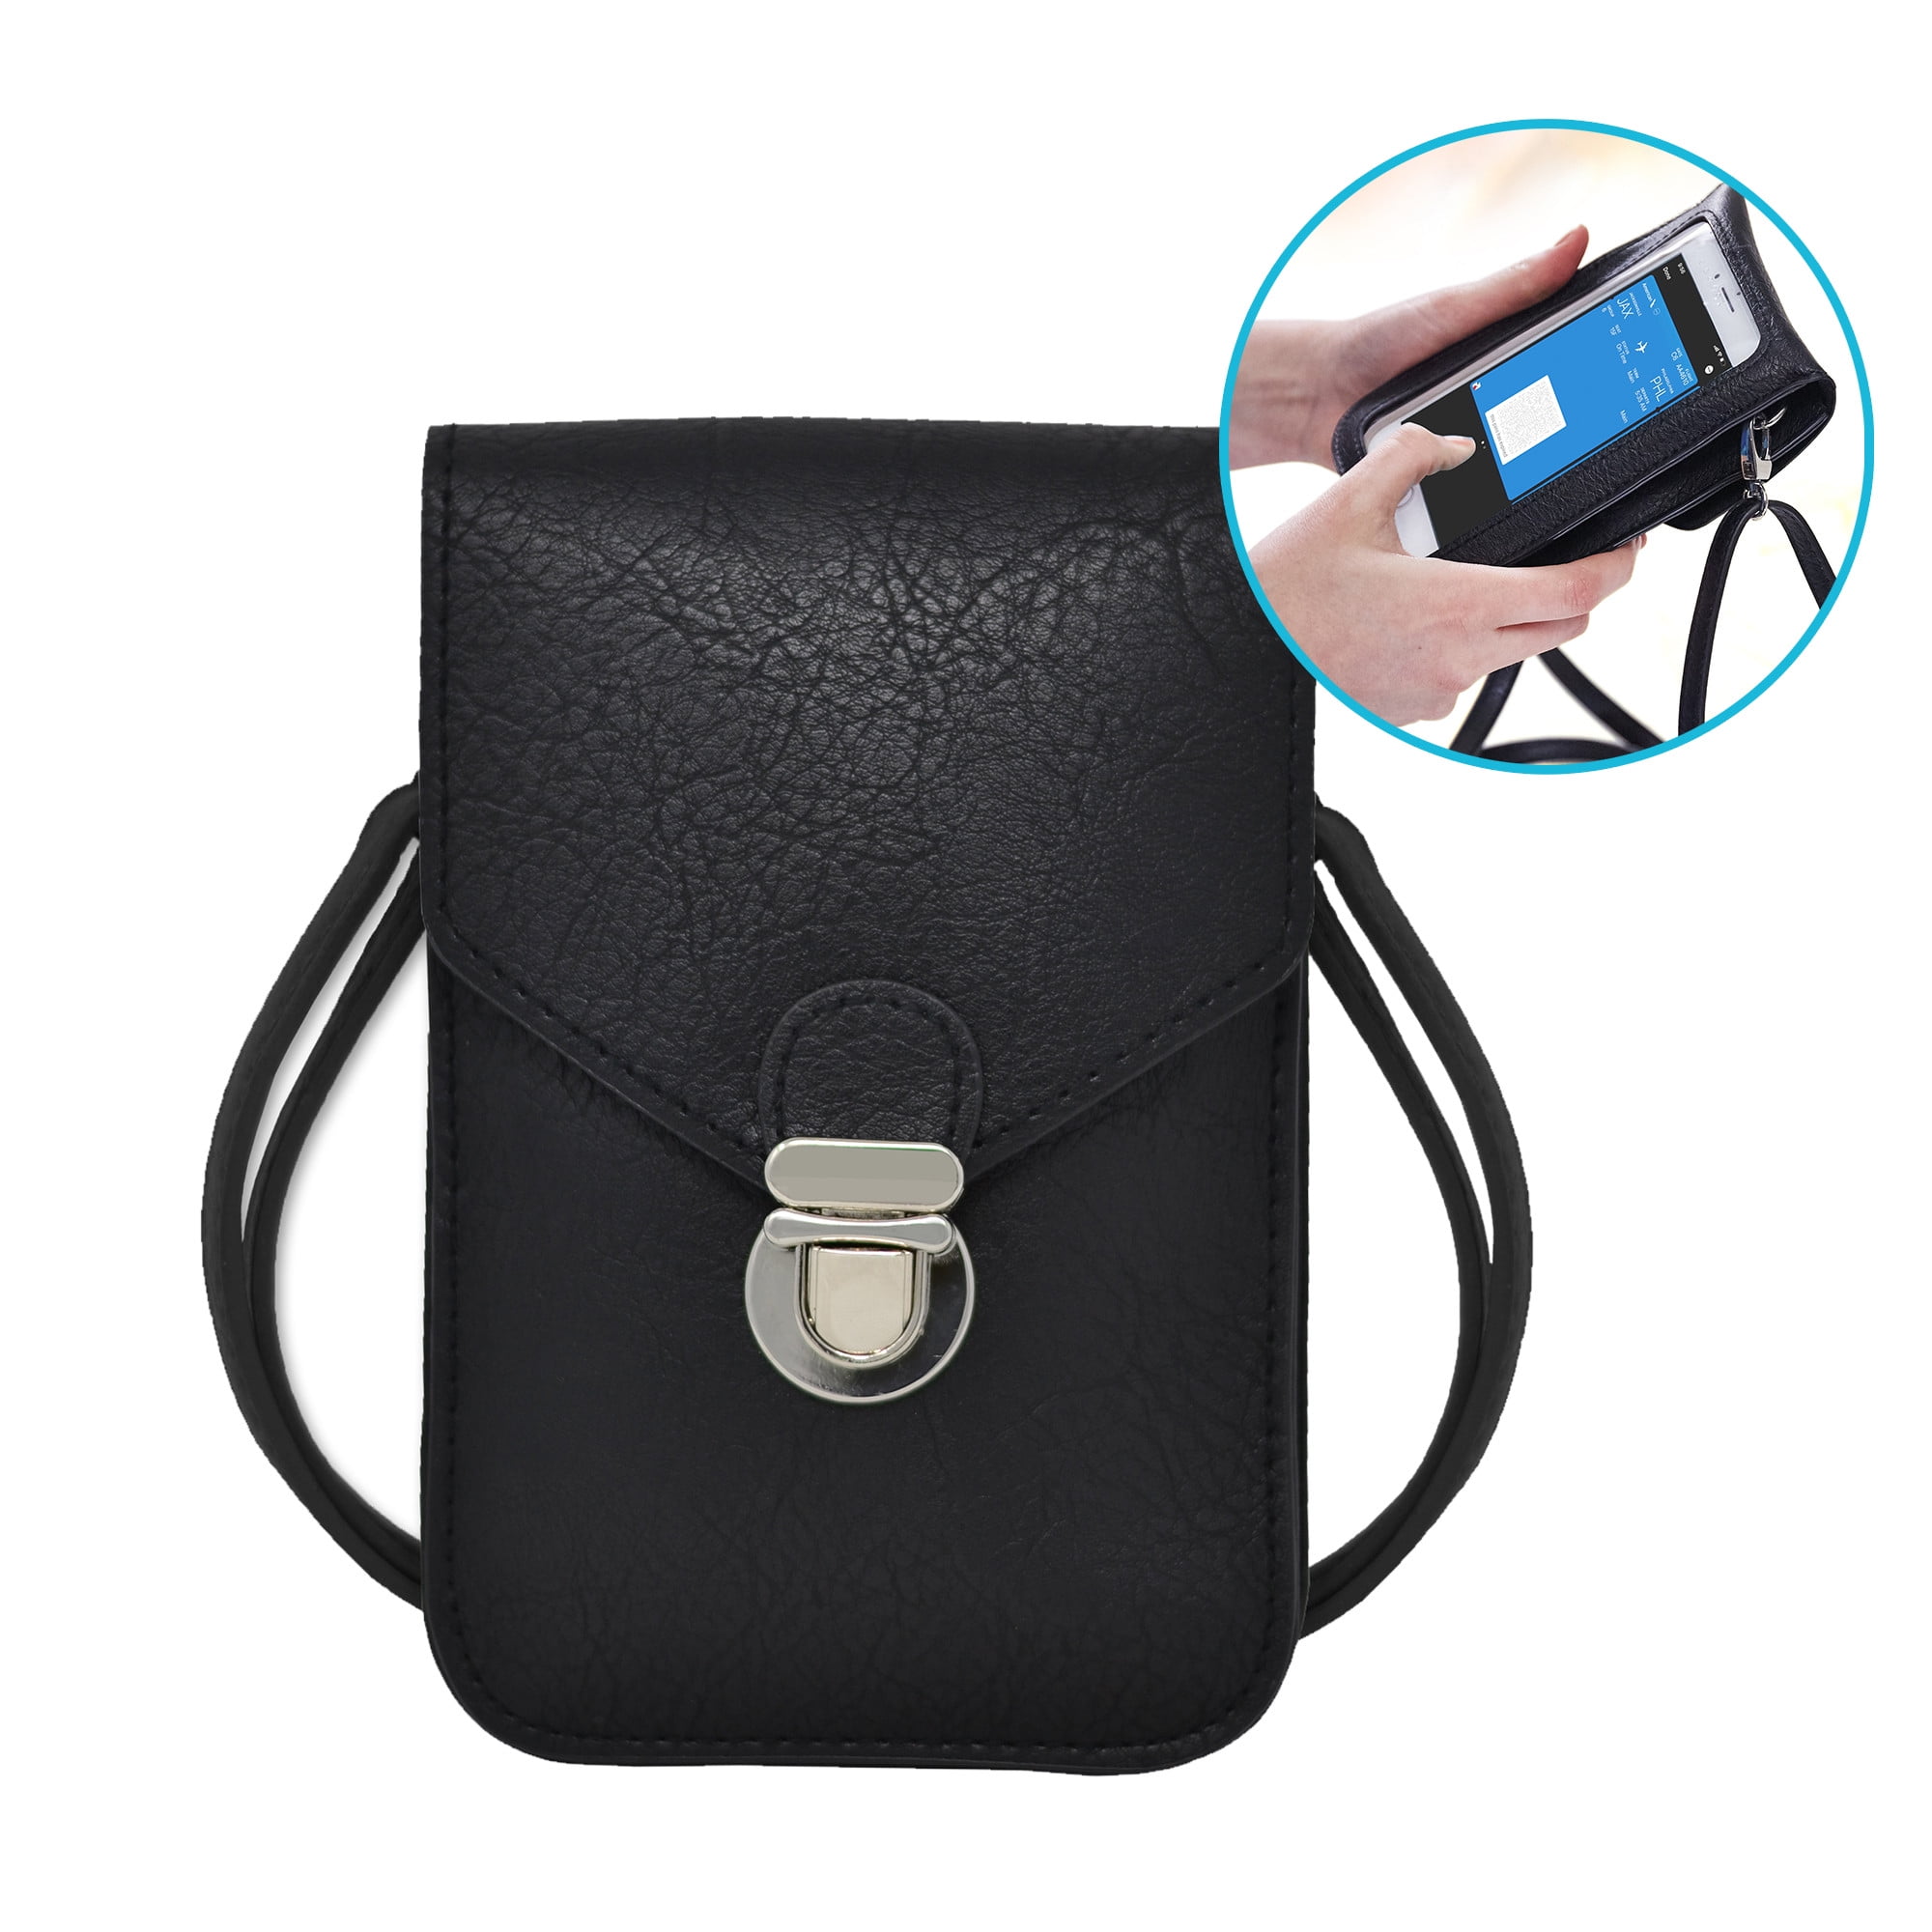 Best Crossbody Phone Bag for Travel to Keep Devices Secure